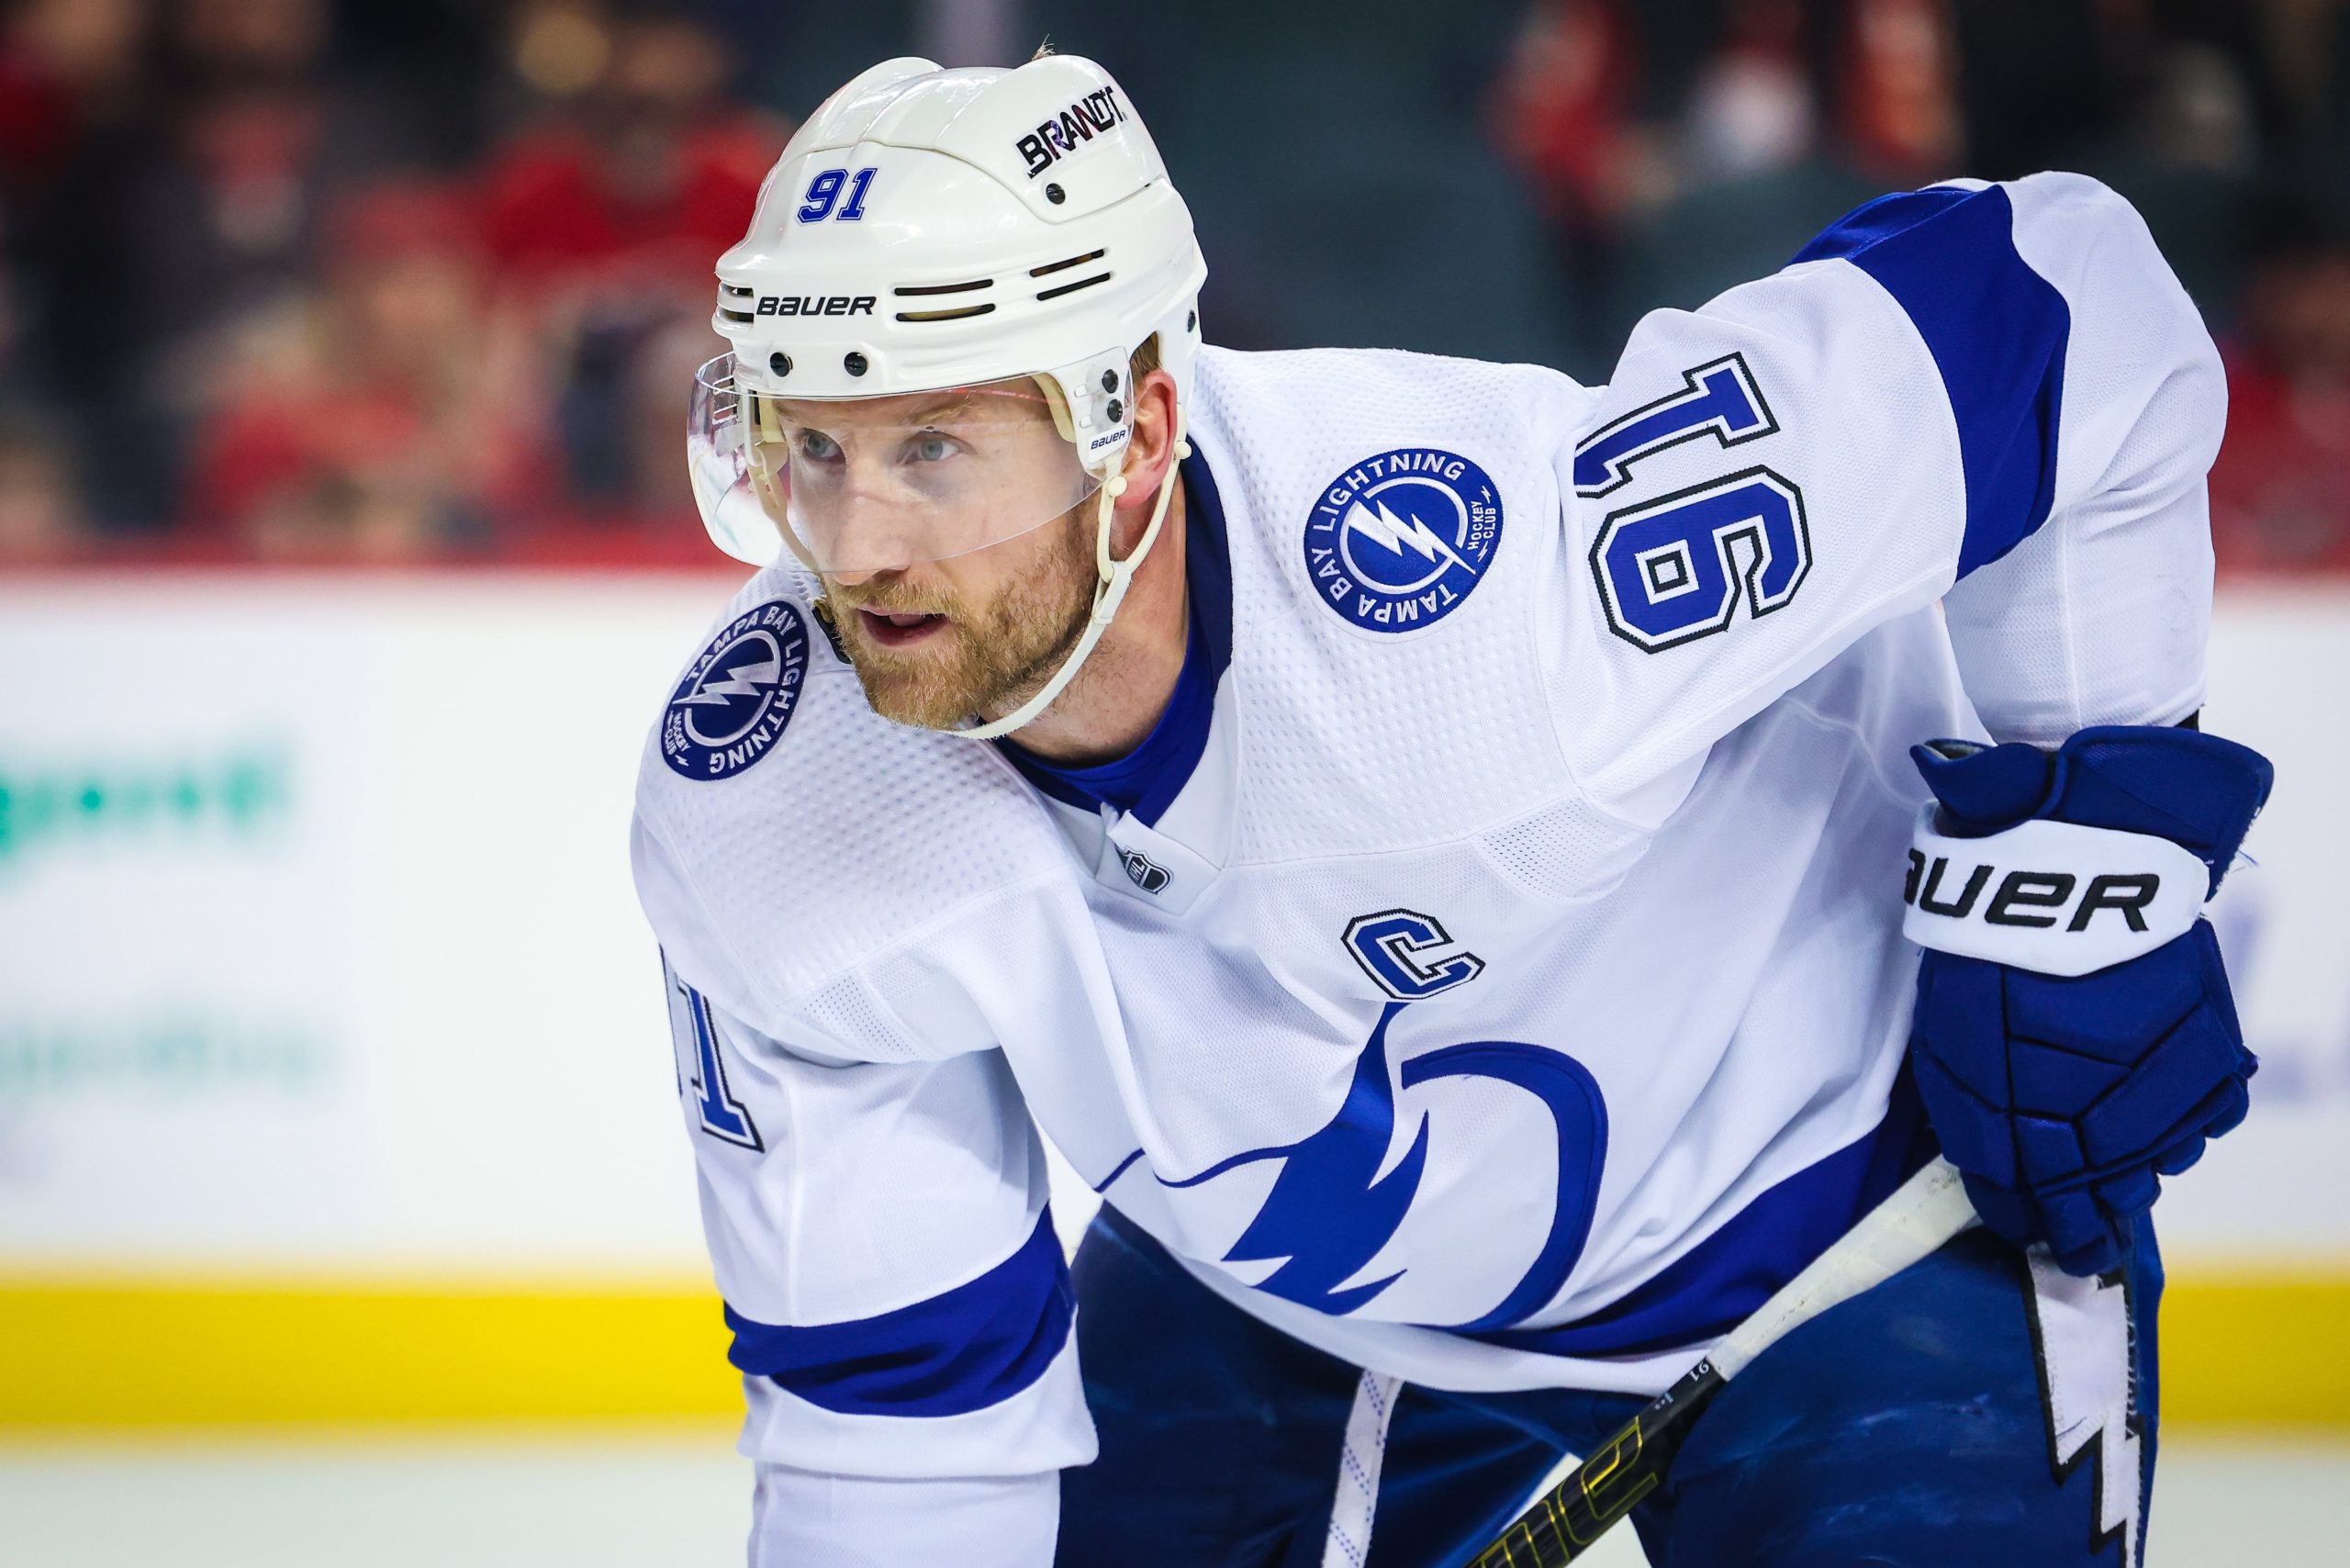 Best NHL player prop bets for Tuesday, 2/7